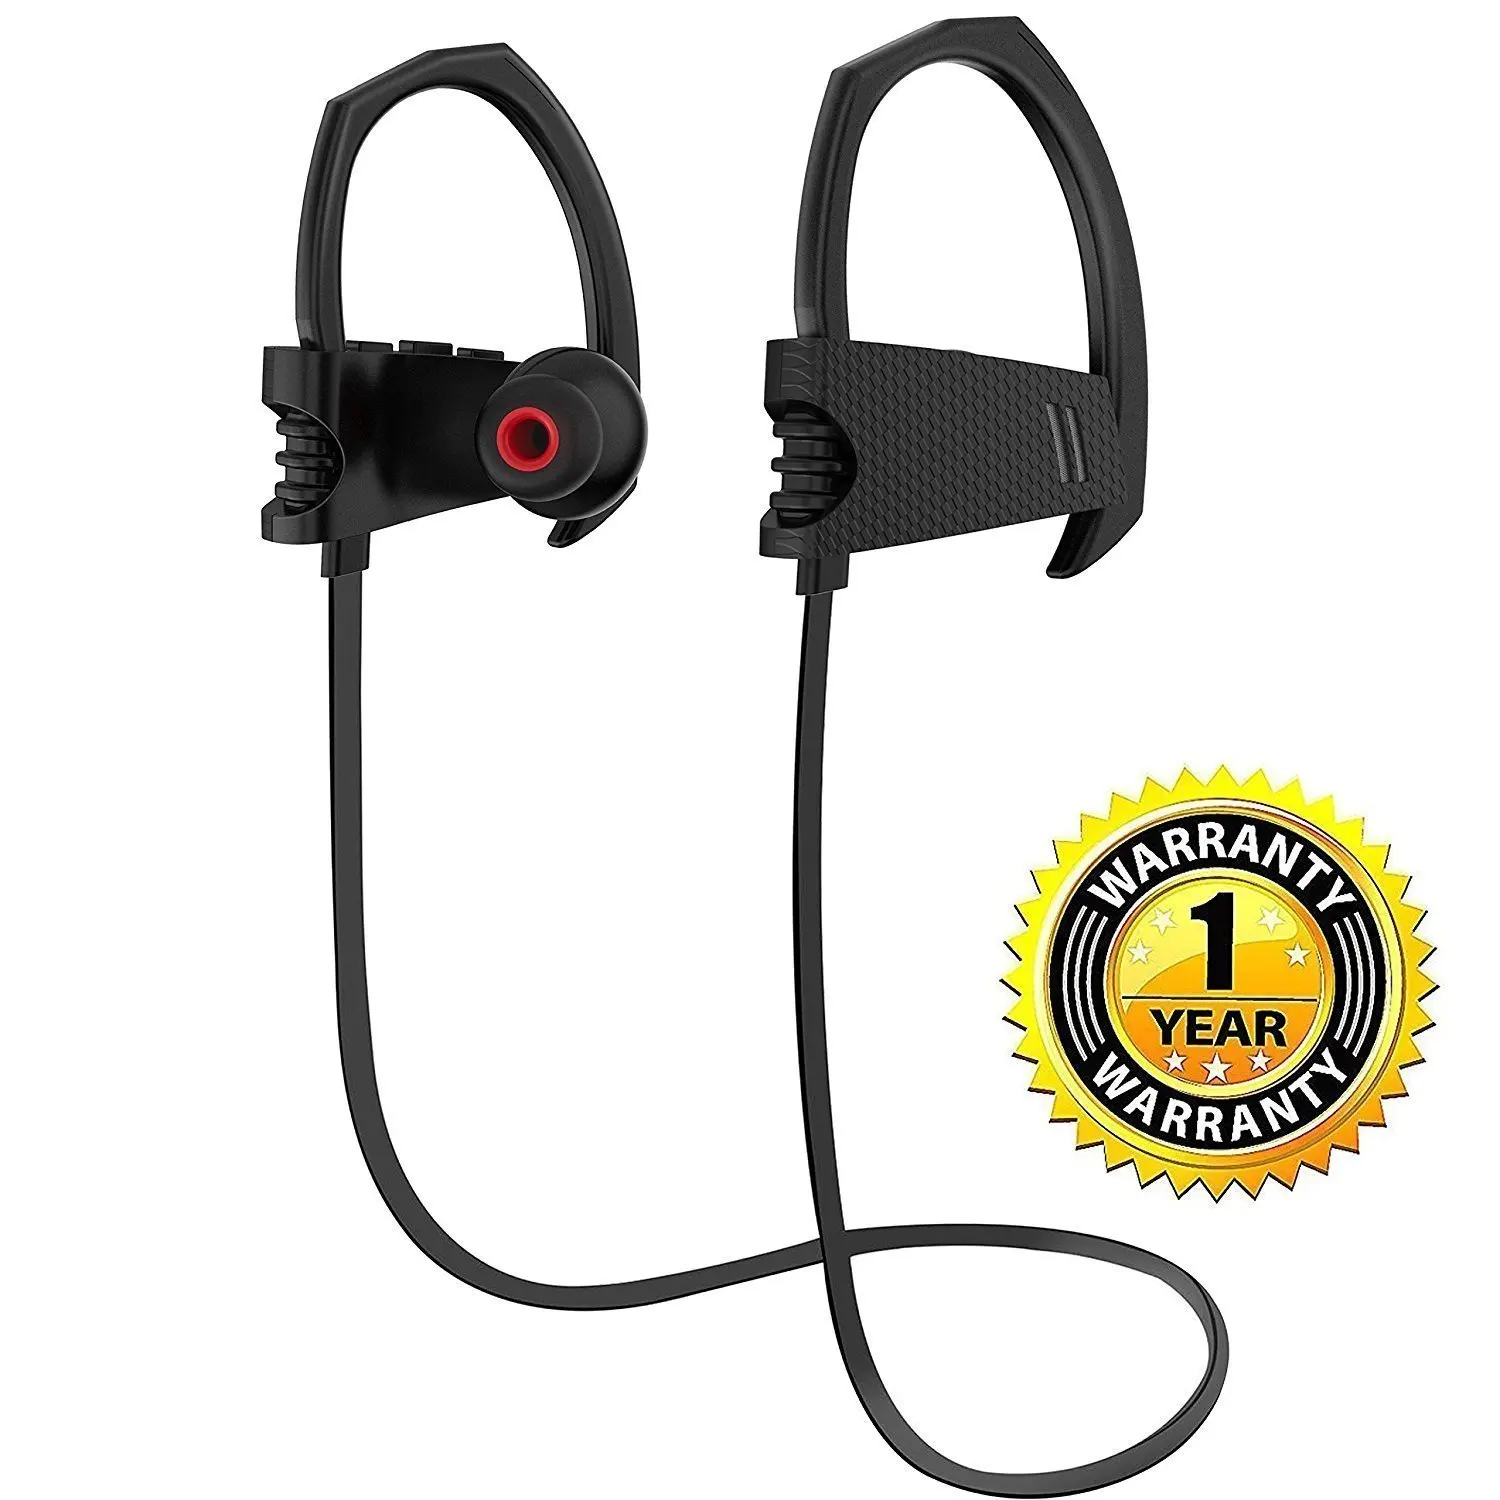 5 Day Best buy workout headphones for push your ABS